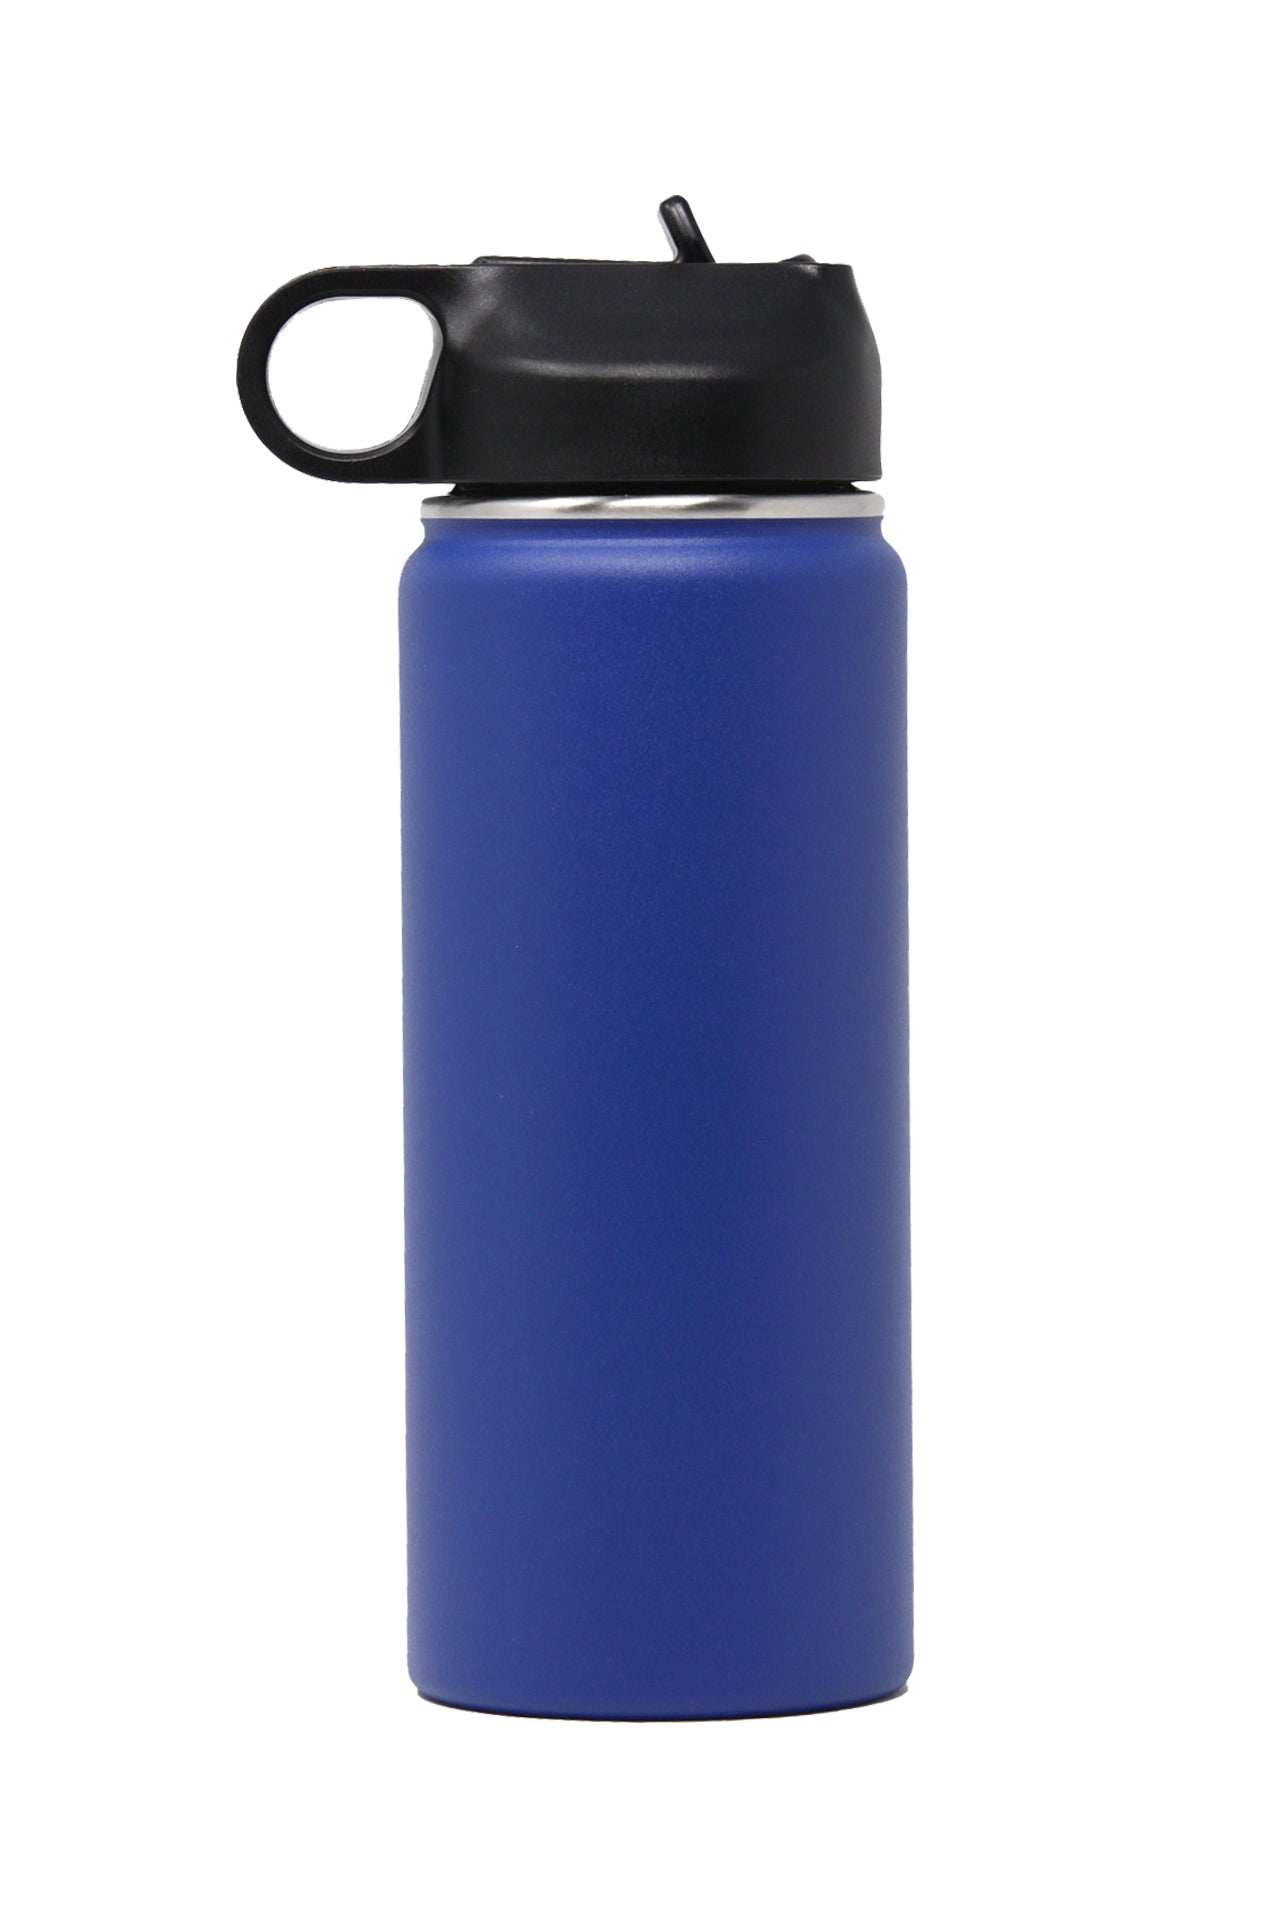 18 oz. Insulated Stainless Steel Water Bottle with Flip Top Lid & Straw